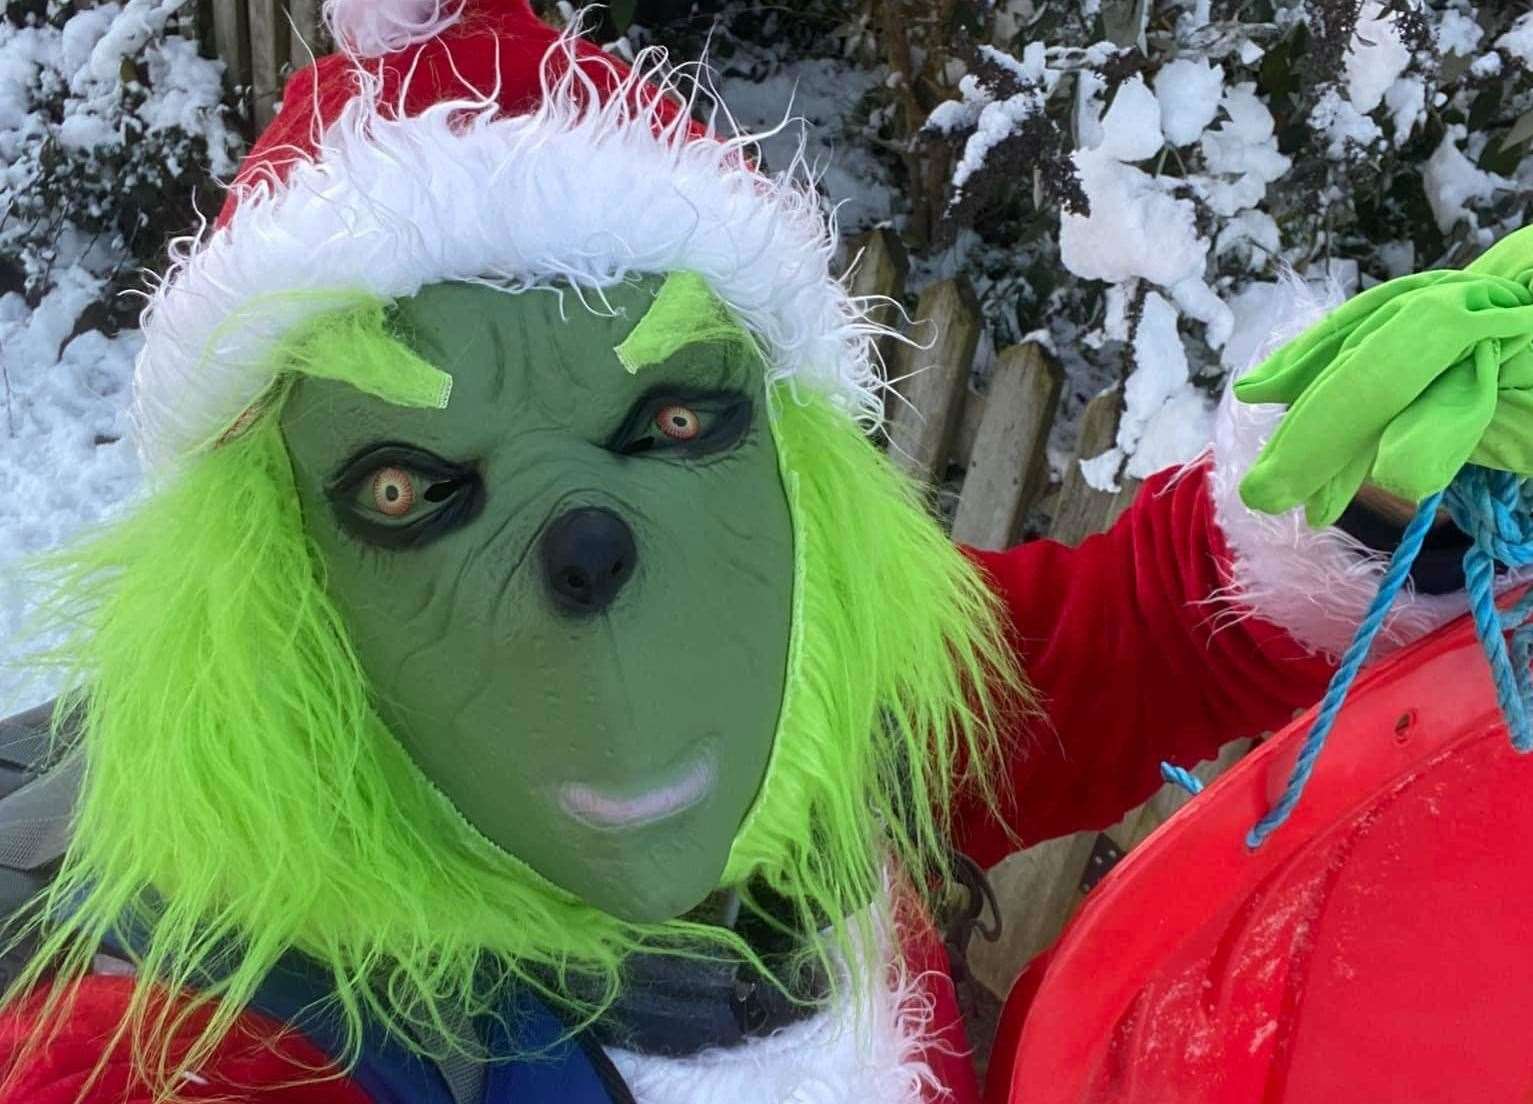 Daniel Wood has been doing the school run dresses as the Grinch